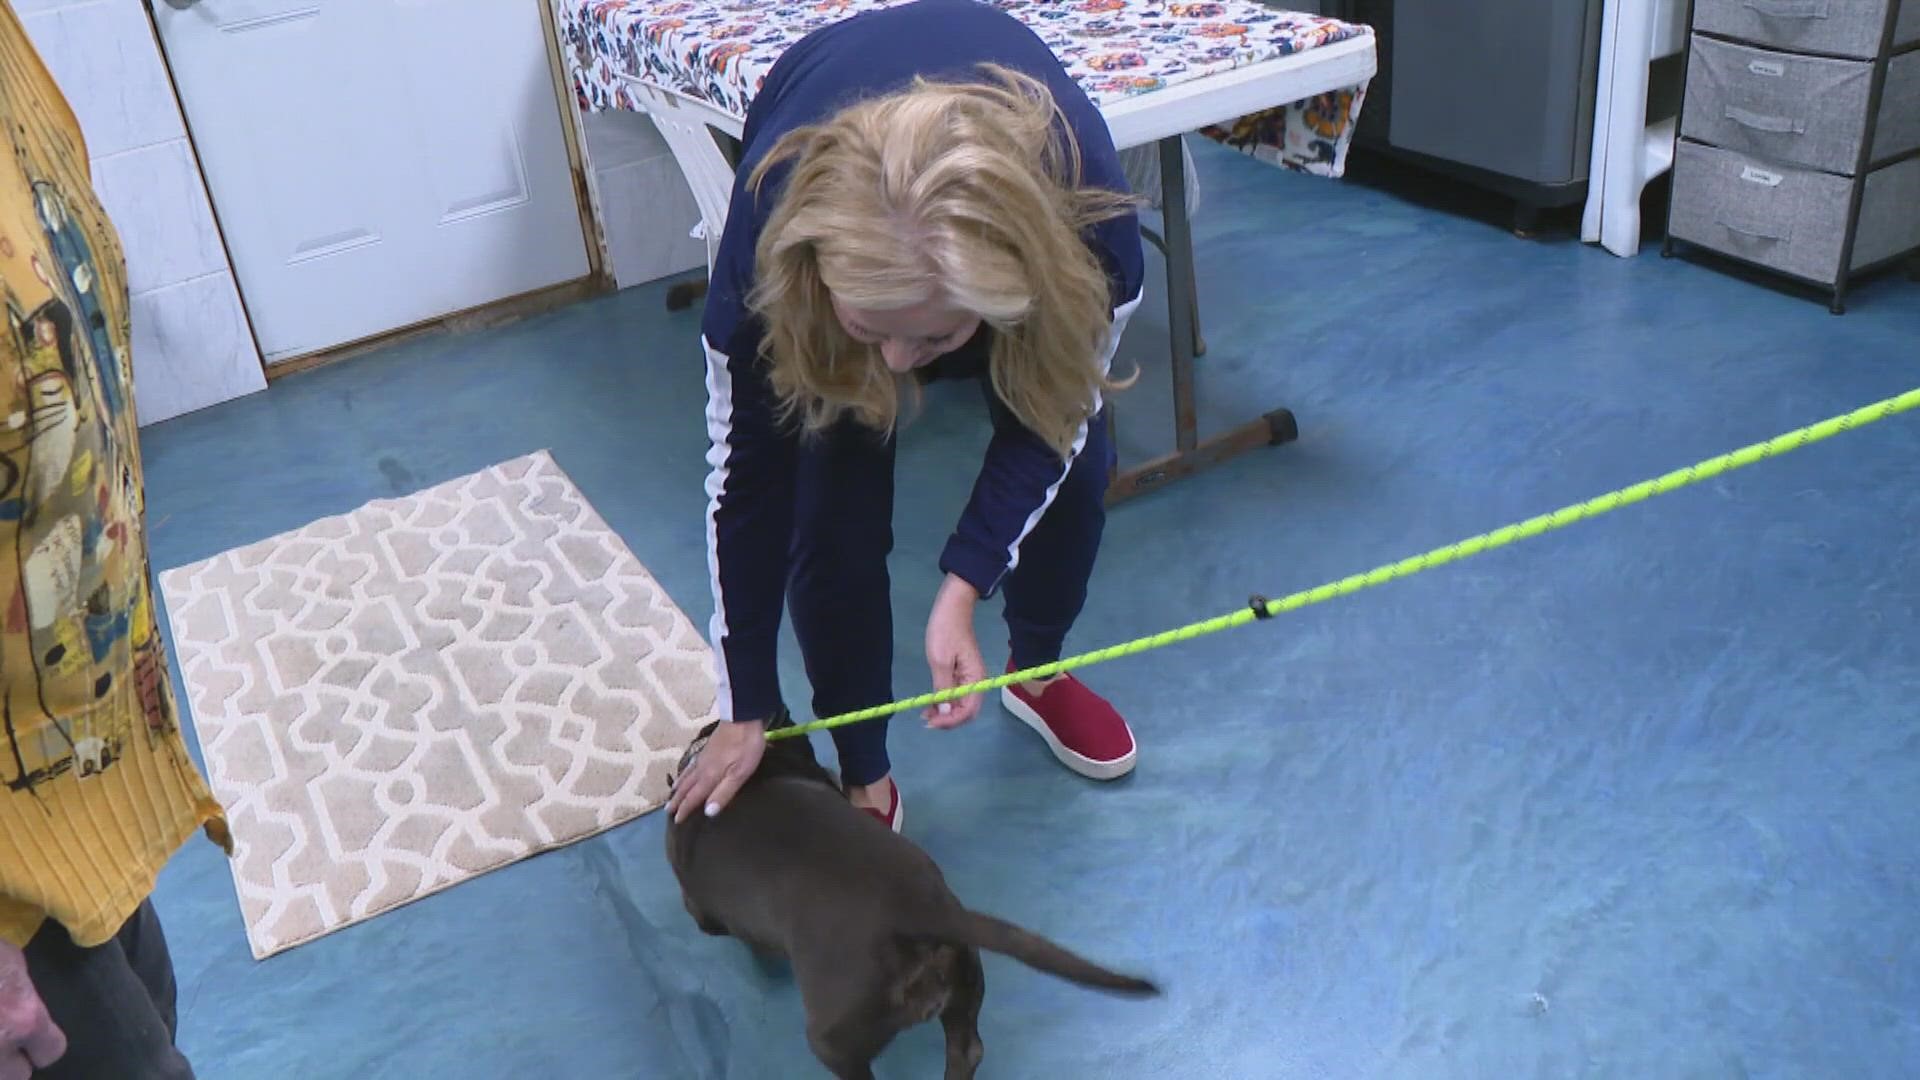 Volunteers at Bloomington's Mannered Mutts Rescue know training saves lives. They offer basic dog training so dogs are better equipped to be adopted.